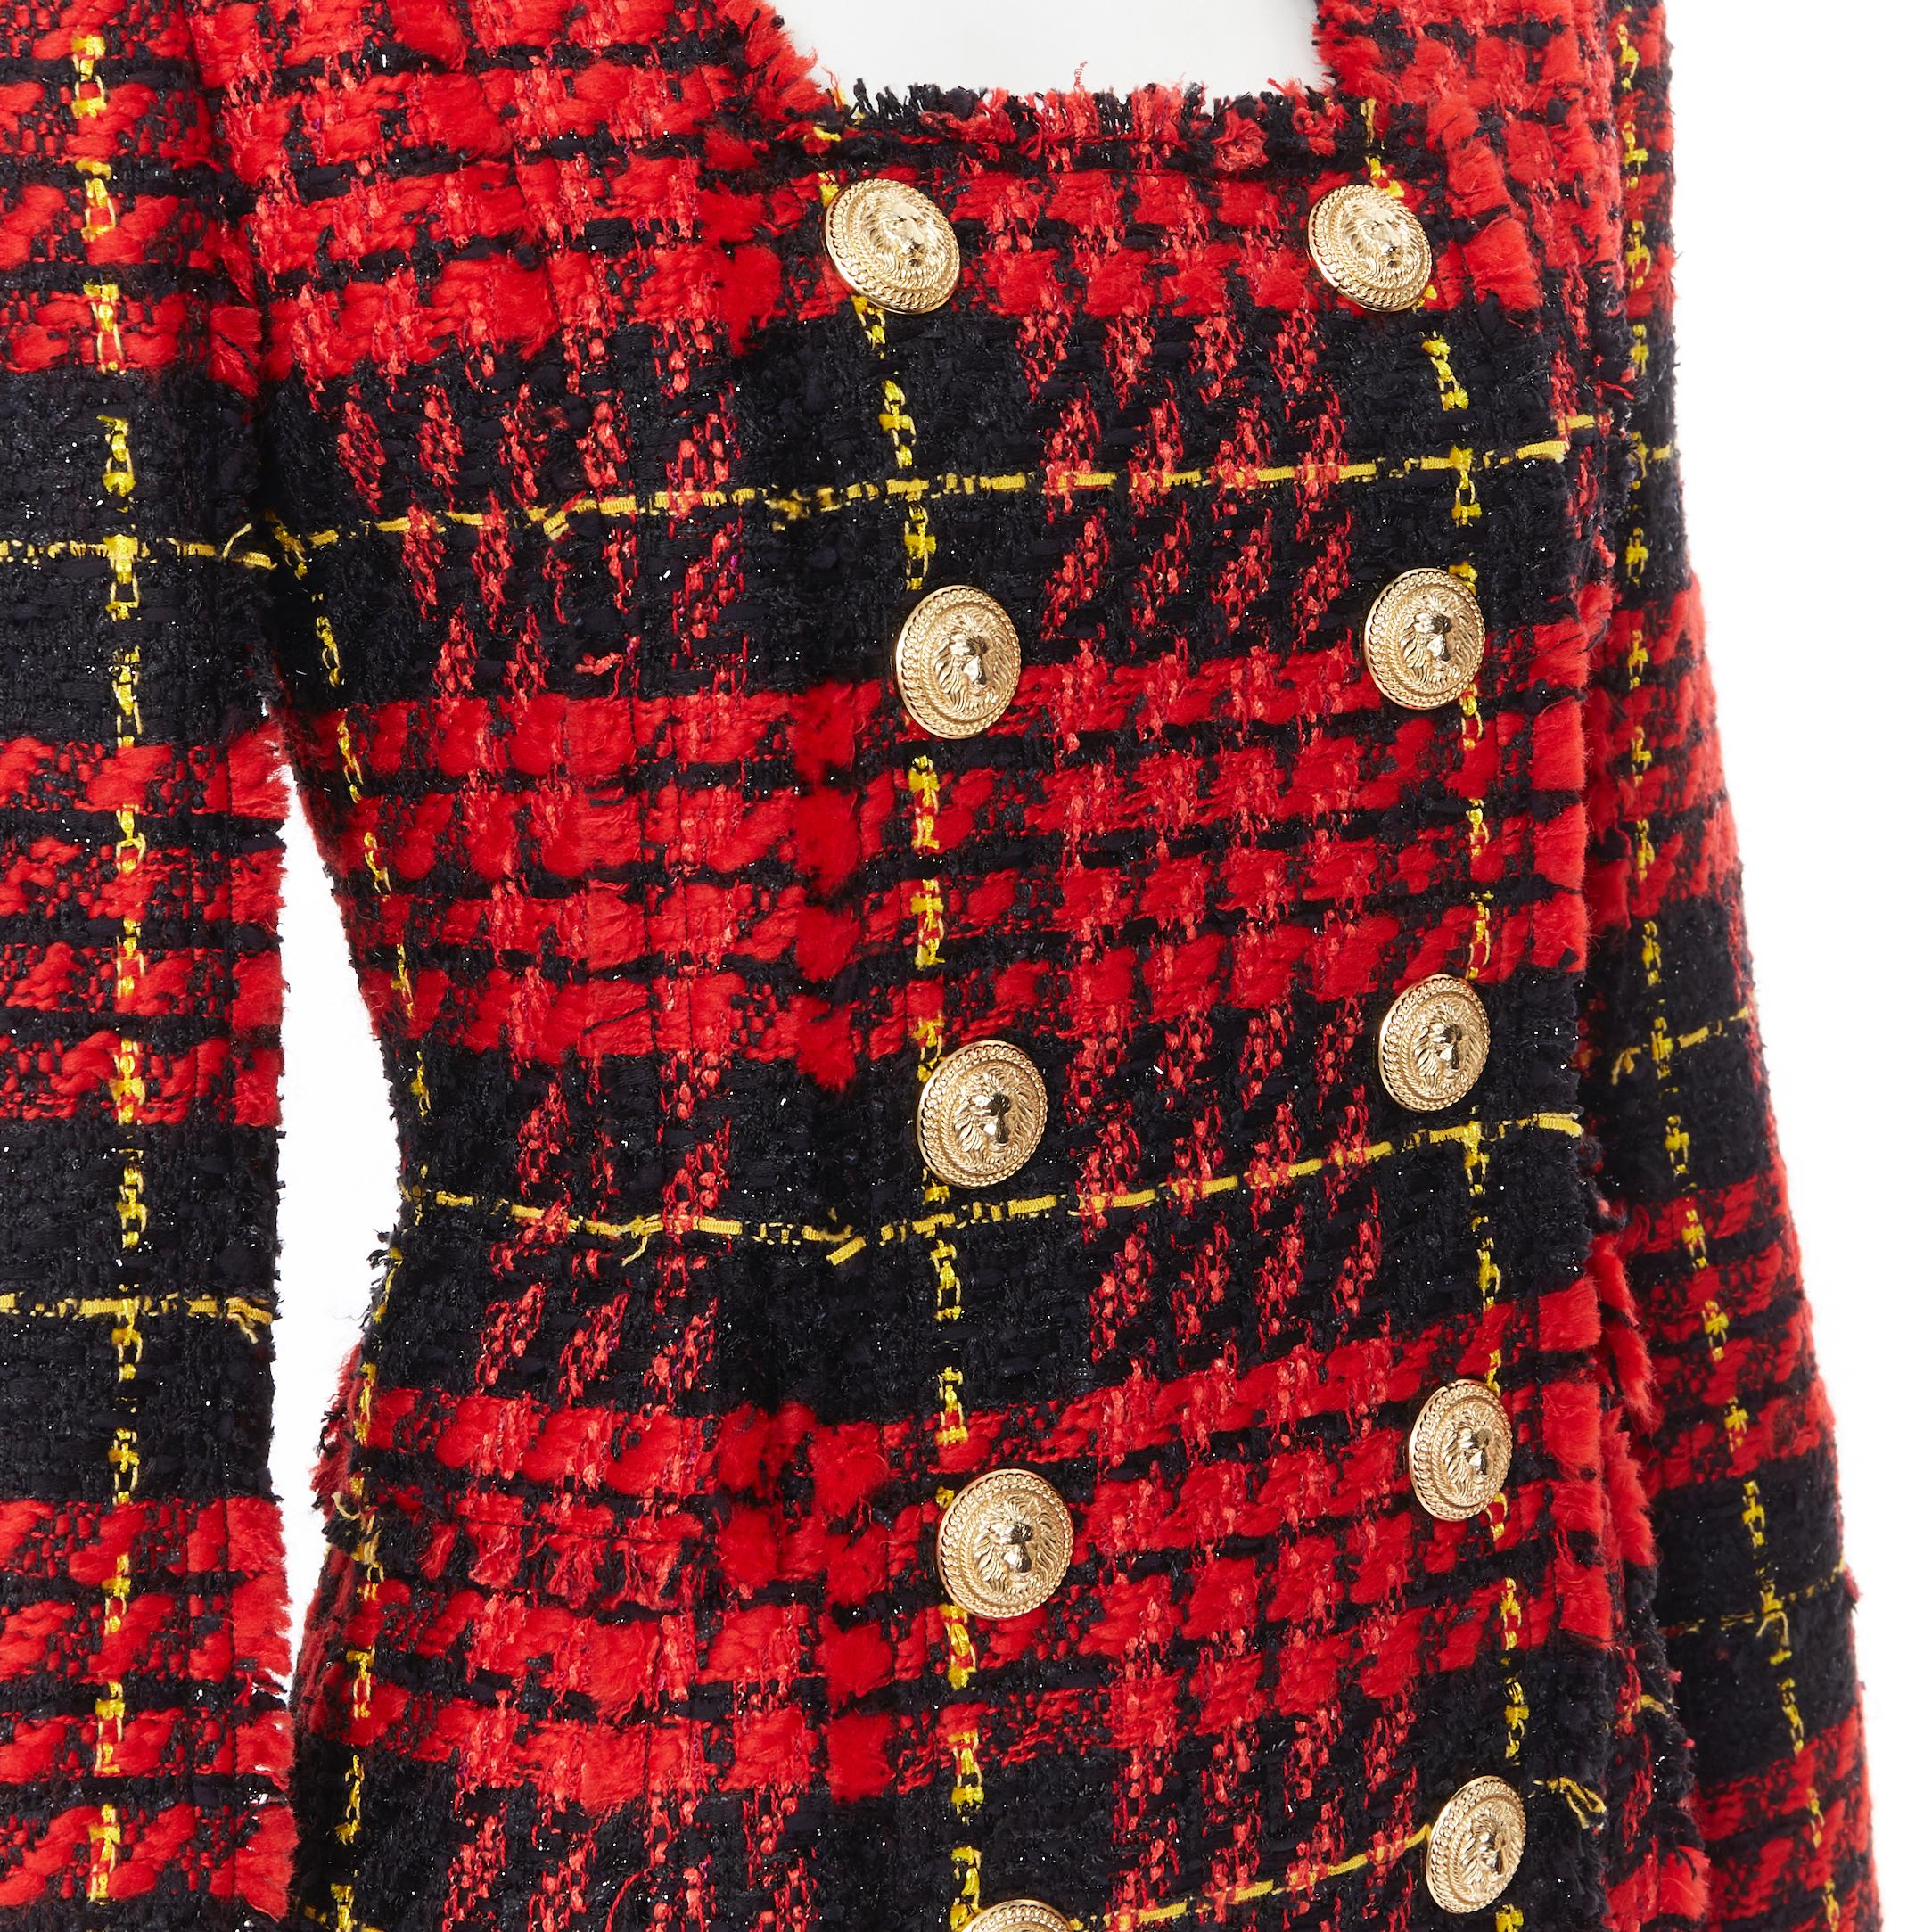 new BALMAIN Runway red black checked tweed double breasted military dress FR34
Reference: TGAS/A05521
Brand: Balmain
Designer: Olivier Rousteing
Material: Polyester
Color: Red
Pattern: Check
Closure: Zip
Extra Detail: BALMAIN style code: